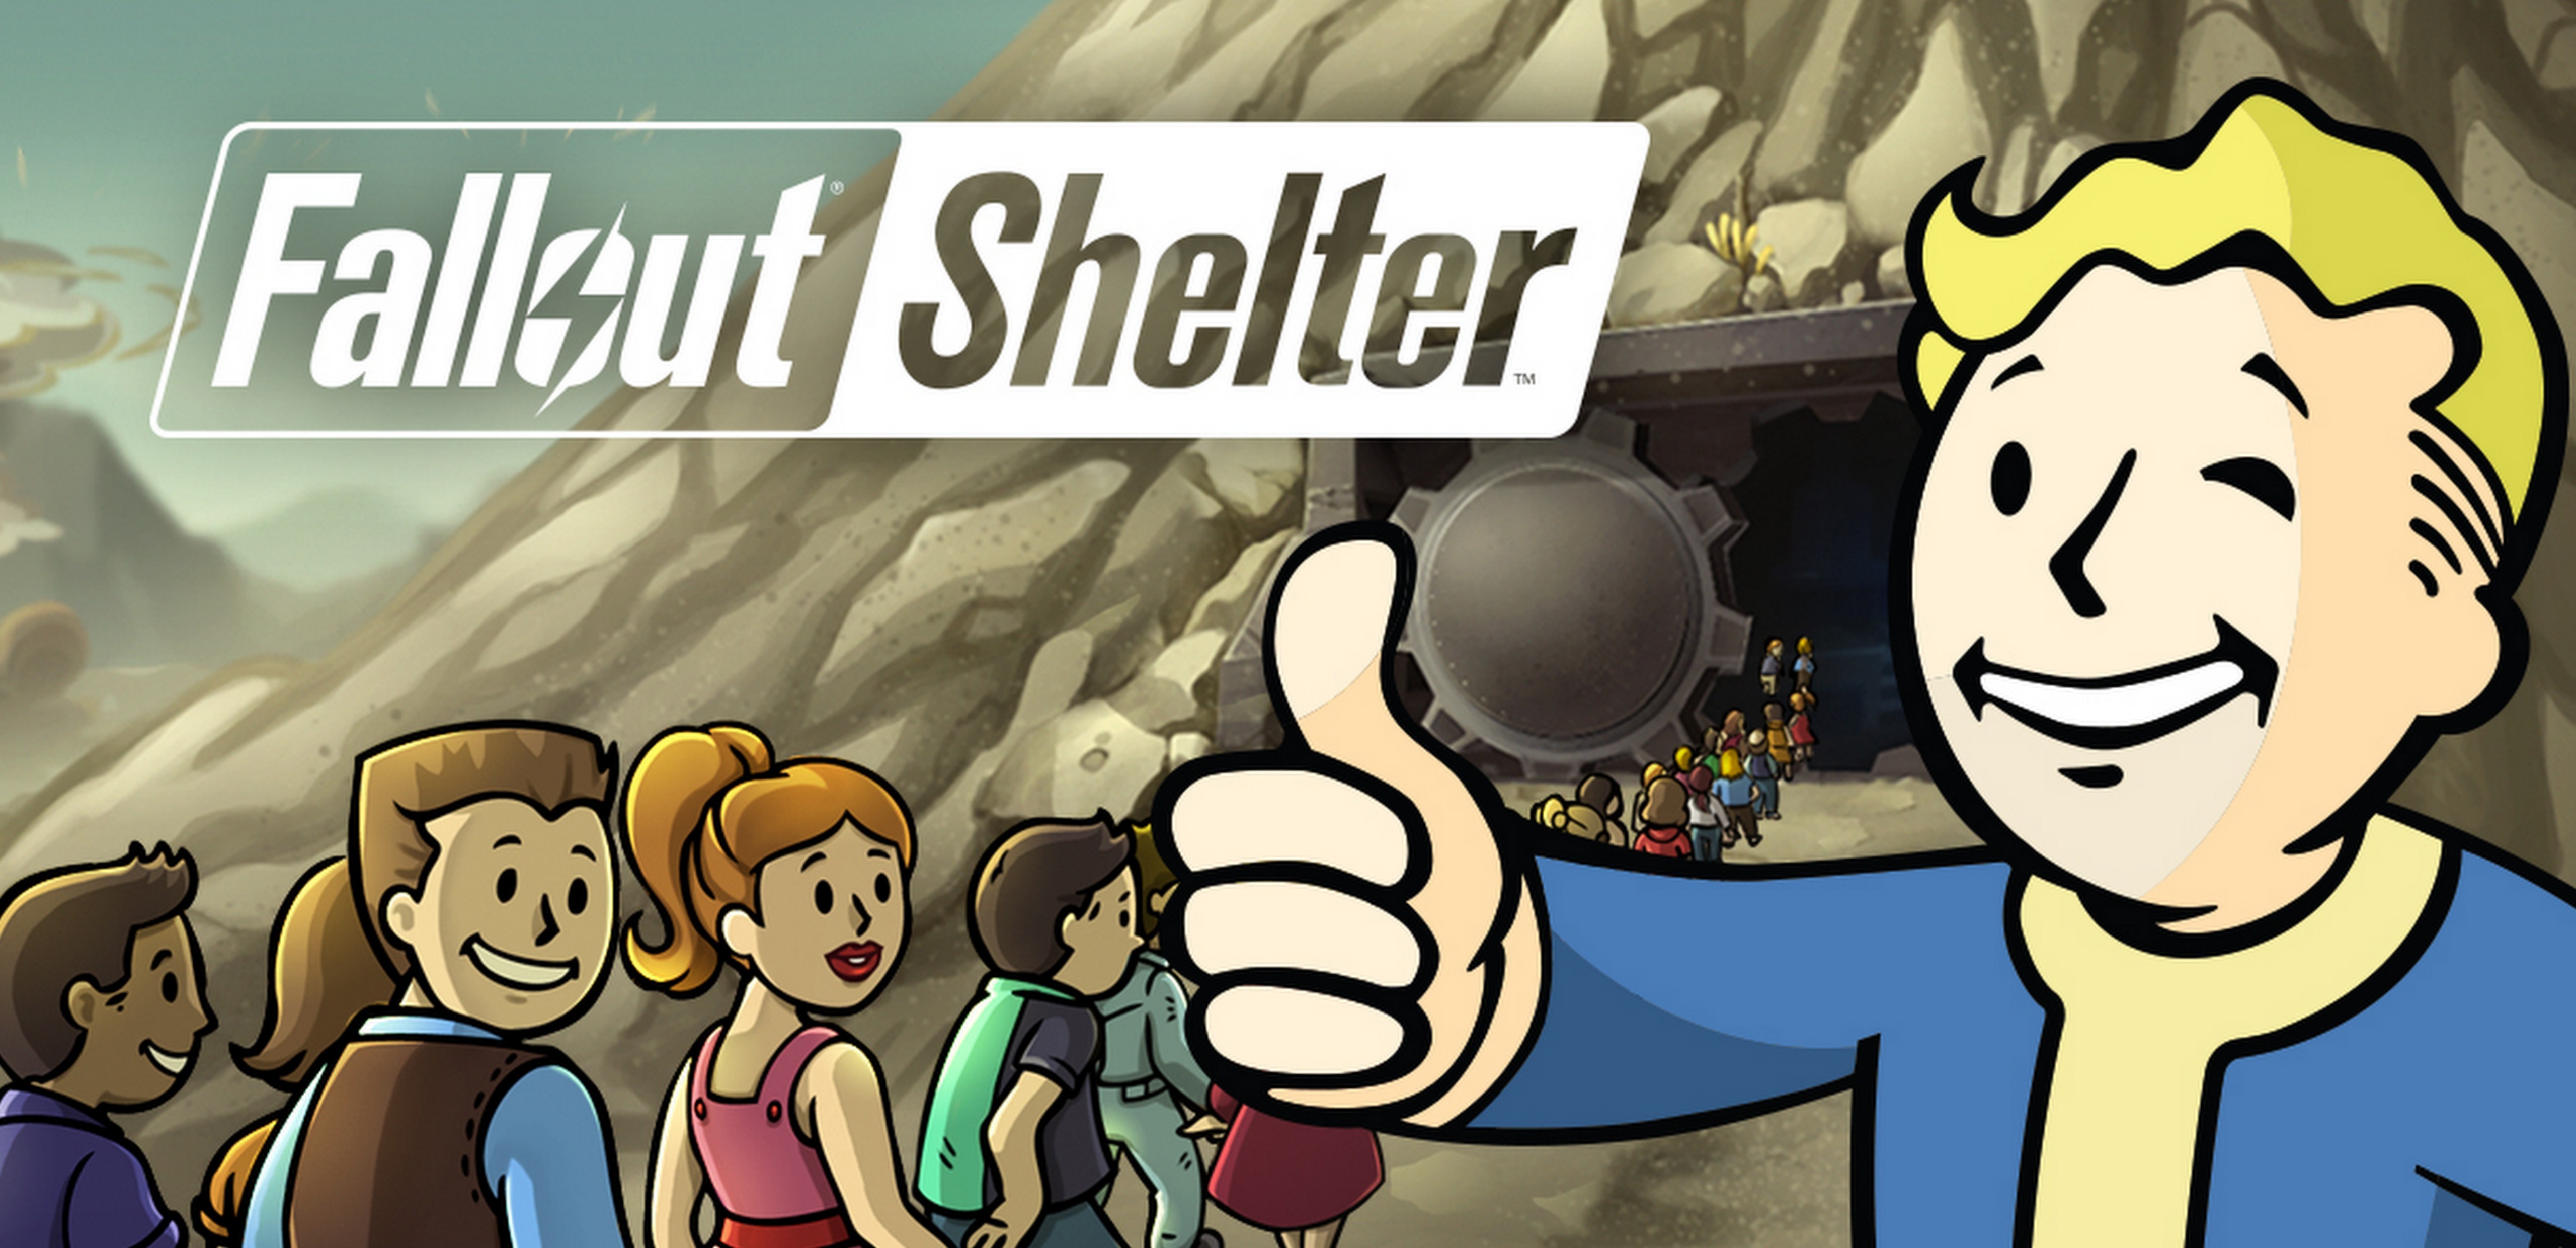 Fallout Shelter now available for Windows 10 and Xbox One